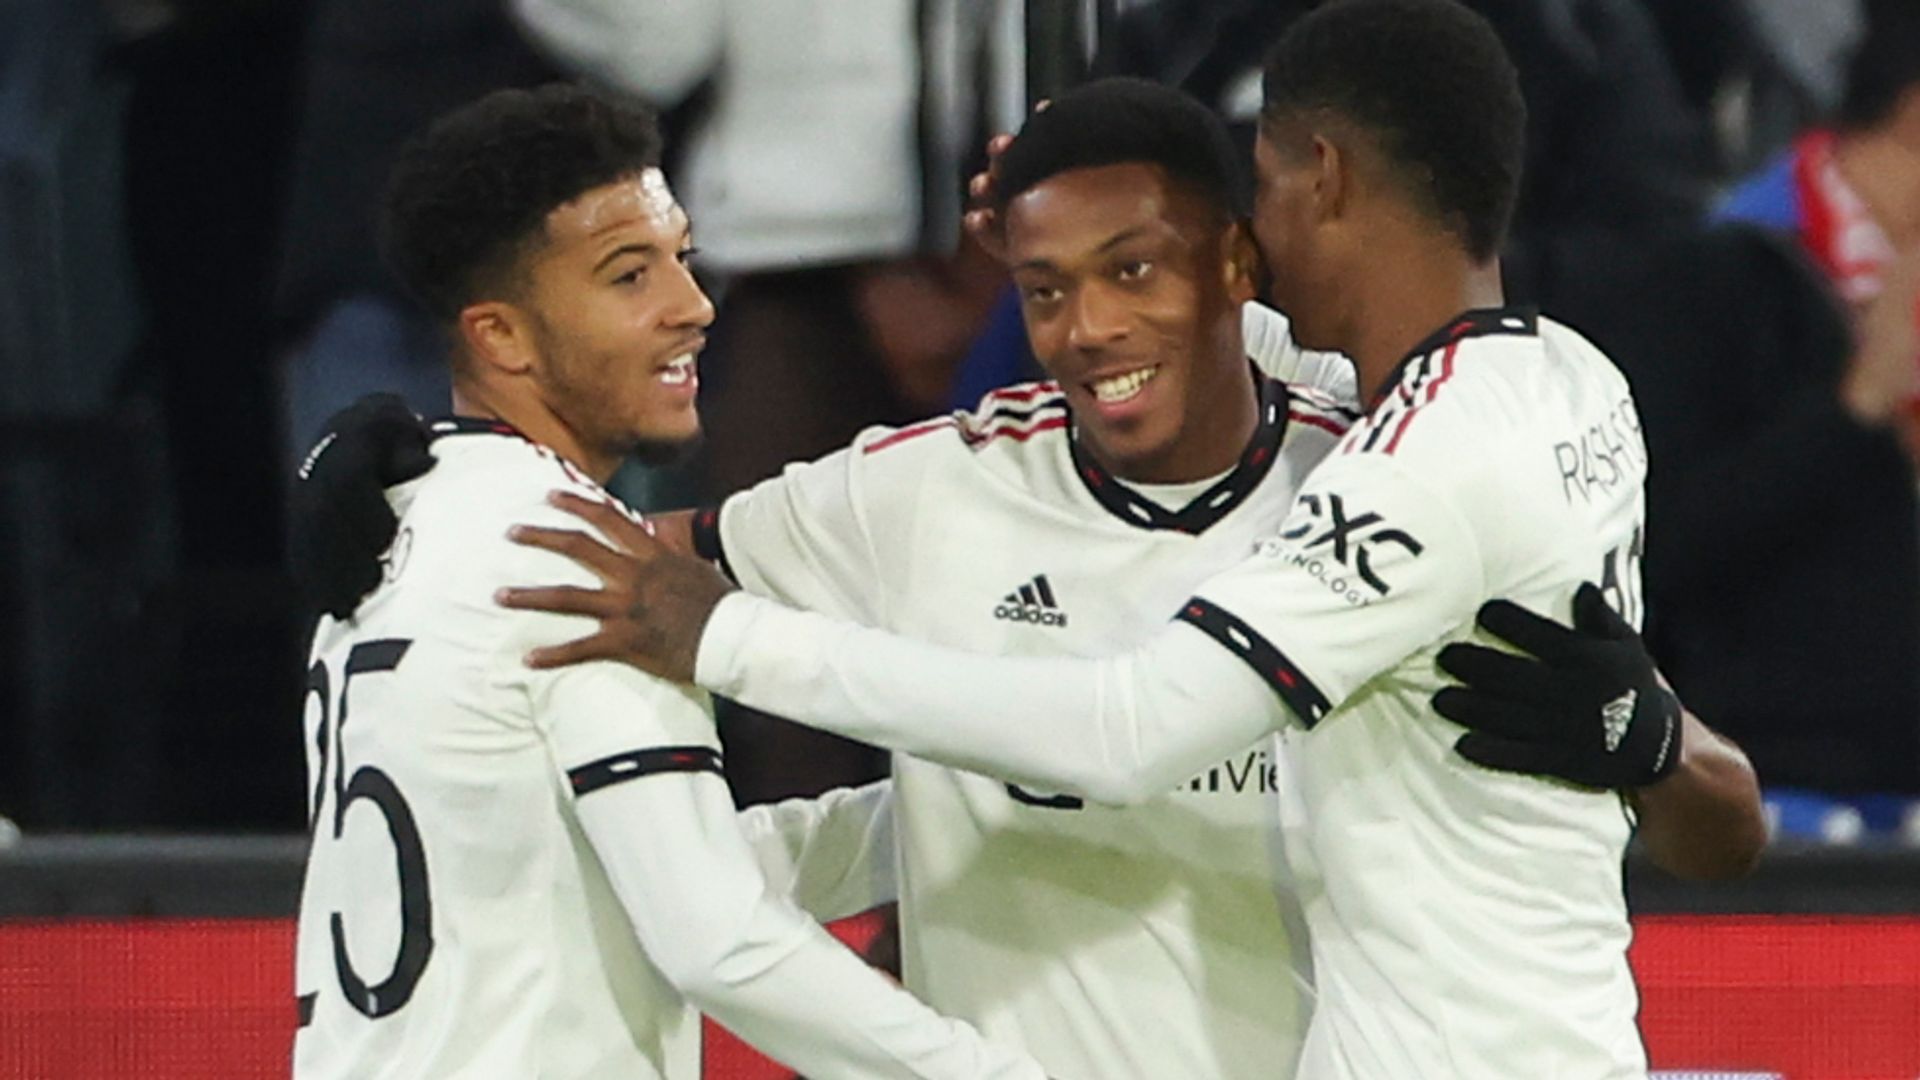 Martial stars, Maguire booed as Man Utd sweep aside Palace